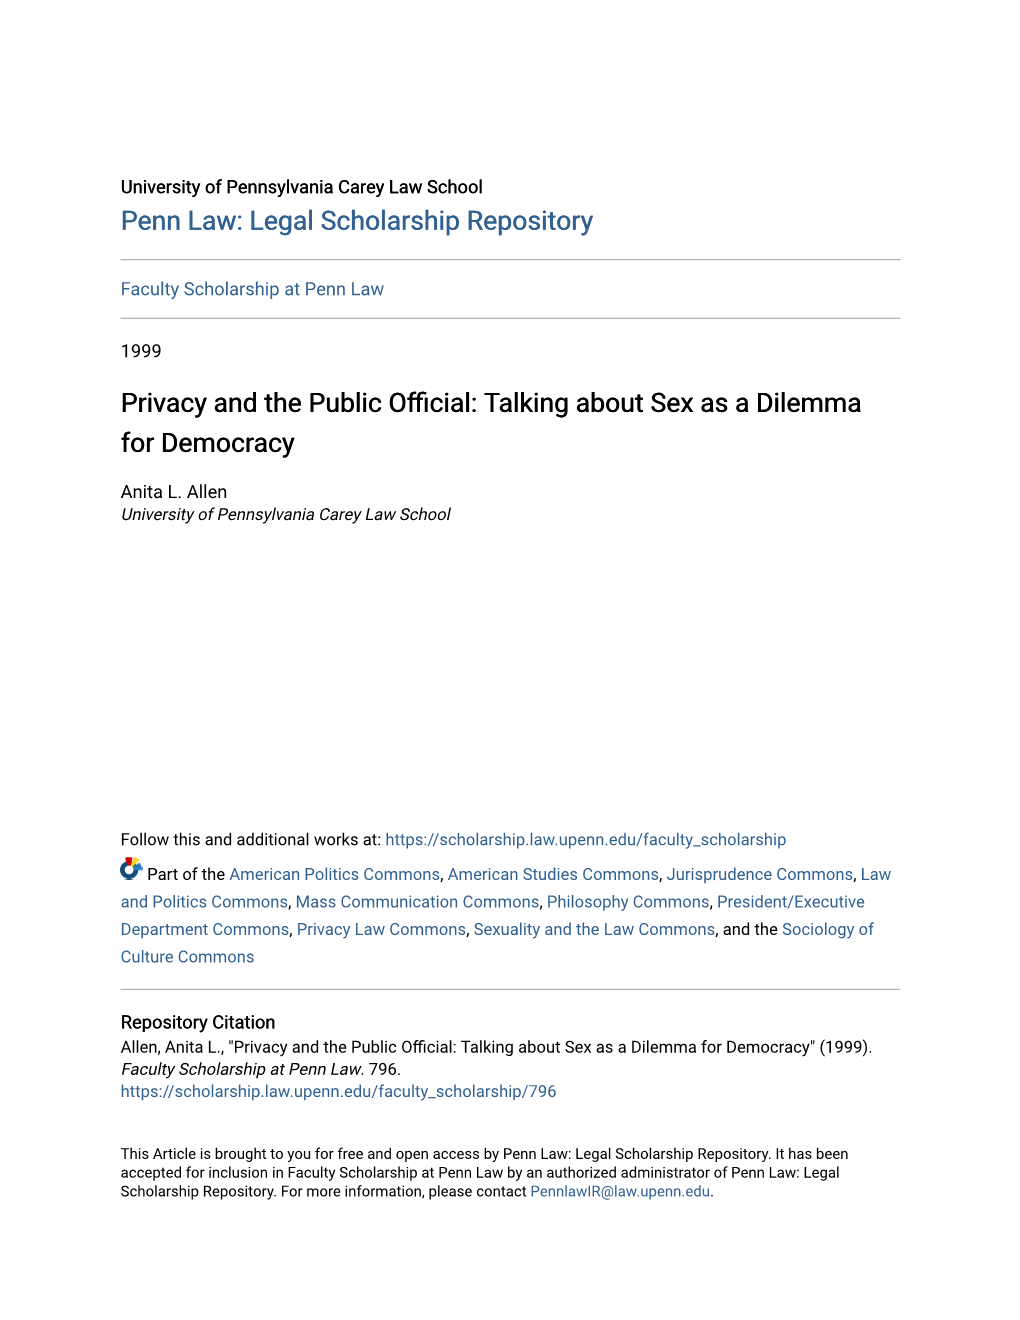 Privacy and the Public Official: Talking About Sex As a Dilemma For